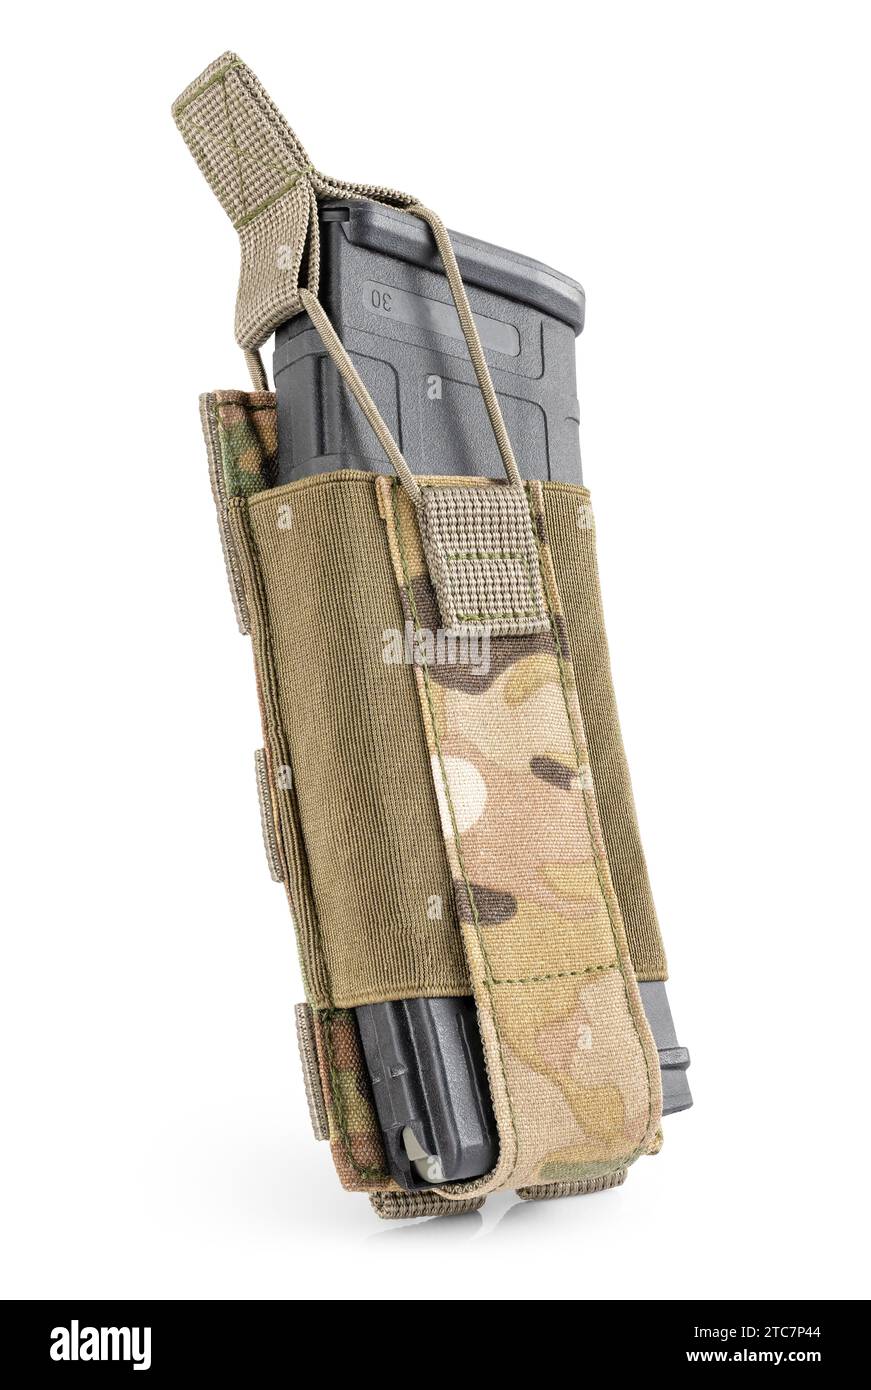 Military pouch in multicam camouflage with bullet magazine inside on white background. Military tactical gear. Stock Photo